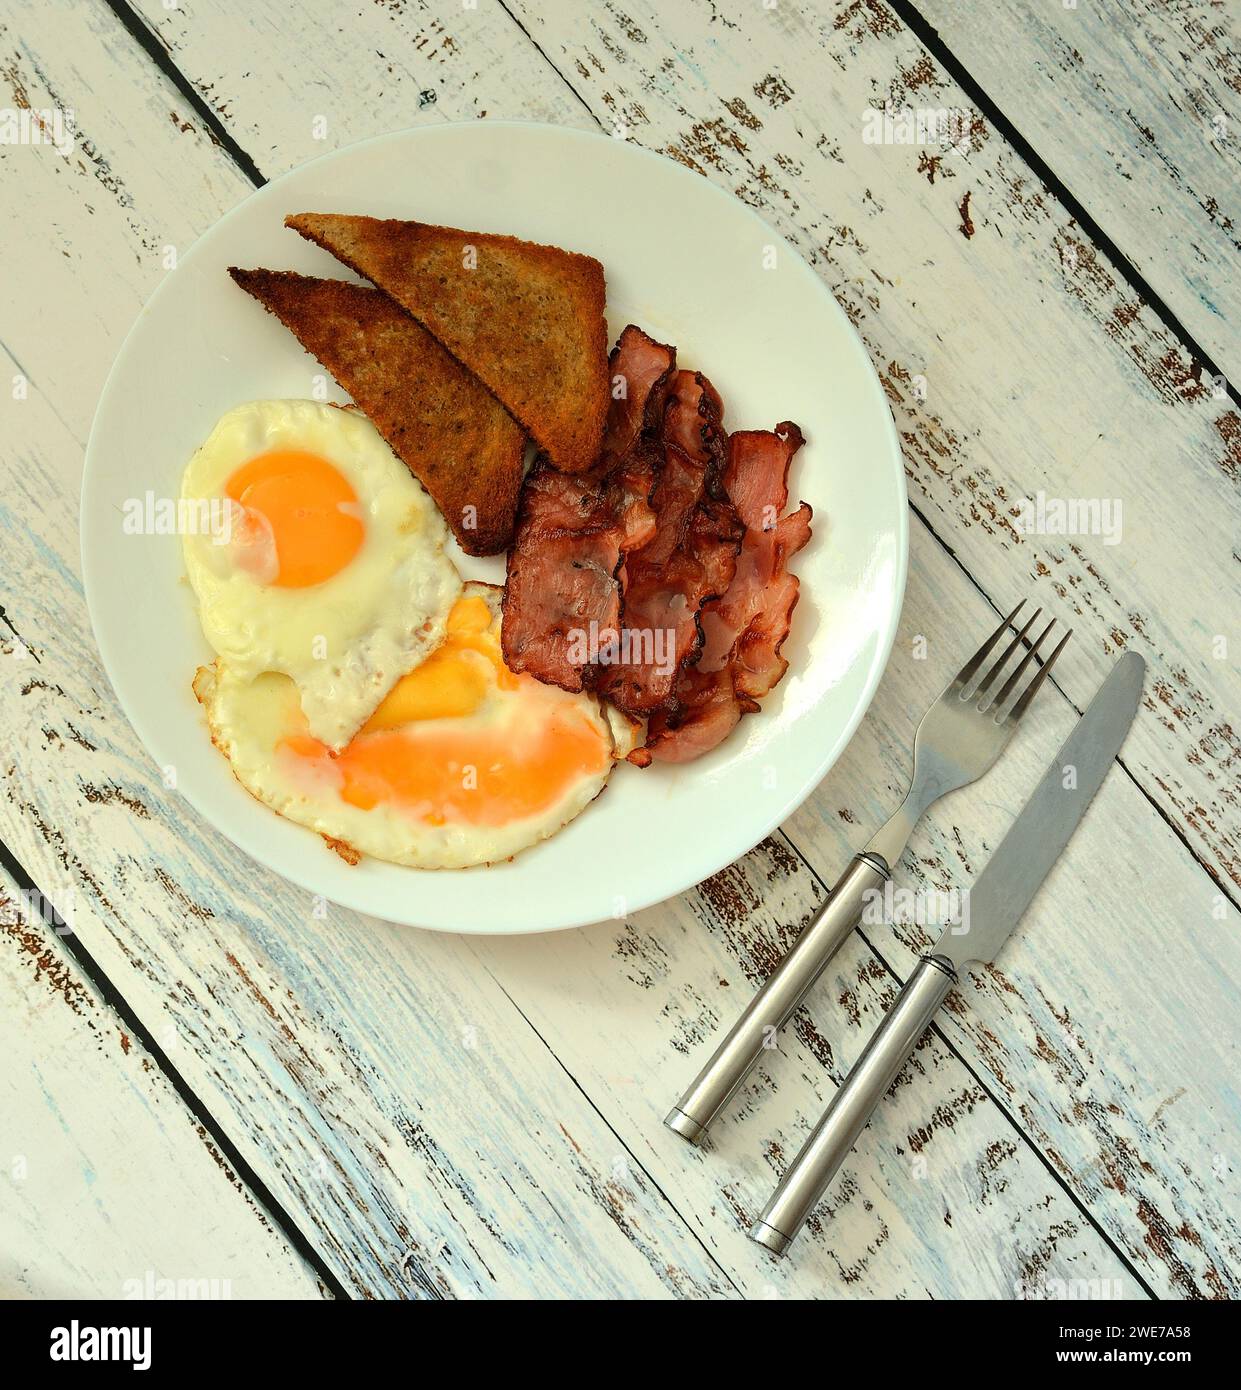 A plate of delicious breakfast, scrambled eggs with bacon, croutons and cutlery on a light wooden table. Top view, flat lay. Stock Photo